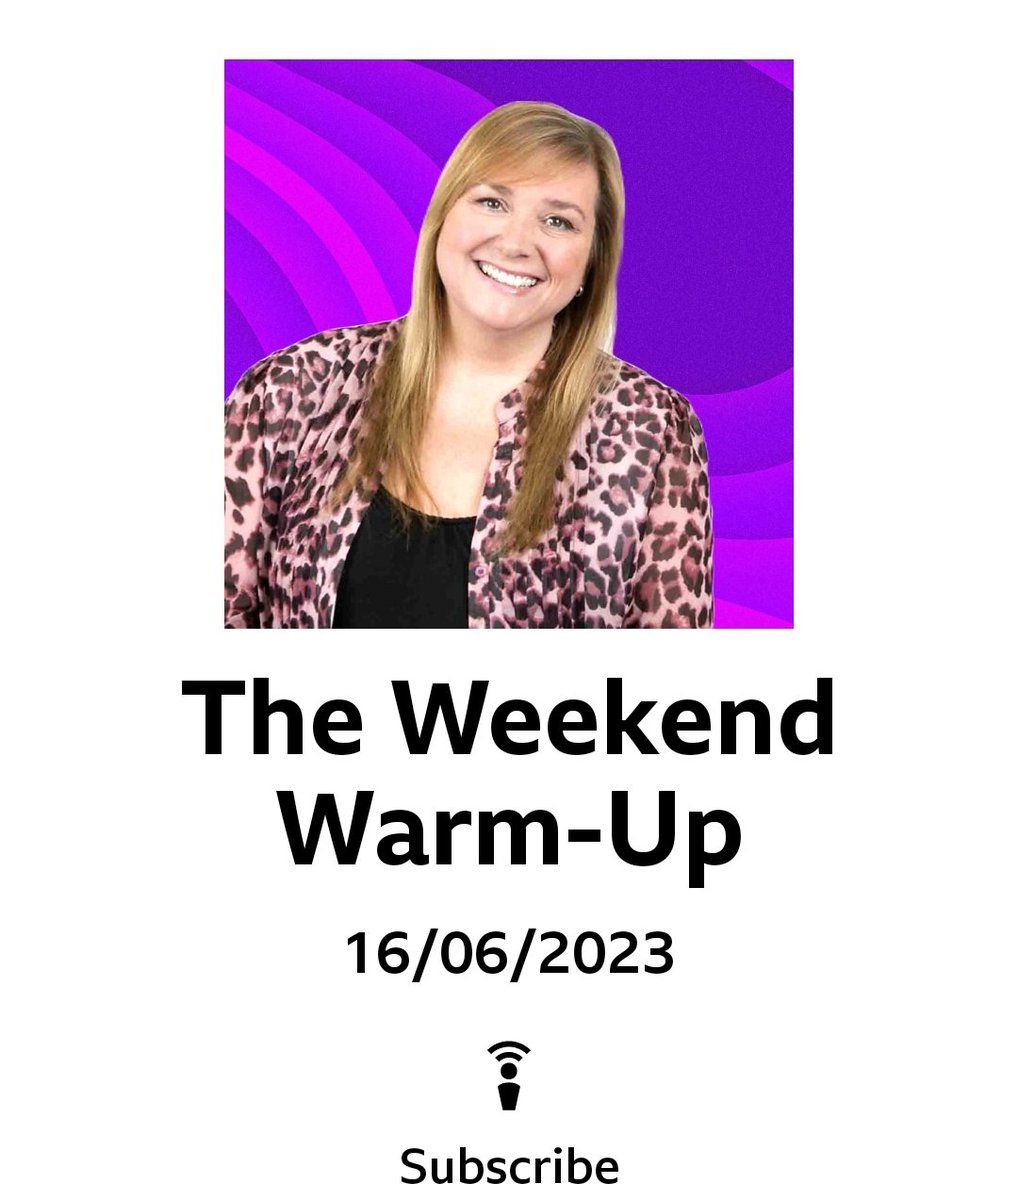 Back on the radio from 7pm tonight for @BBCOxford Weekend Warm Up. We've got great live music & chat from @dollymavies The Friday Fakeaway is back! Find out how to make dreamy ice cream at home with no fancy equipment Plus @offbeatfest tells us about its fab fest this weekend!